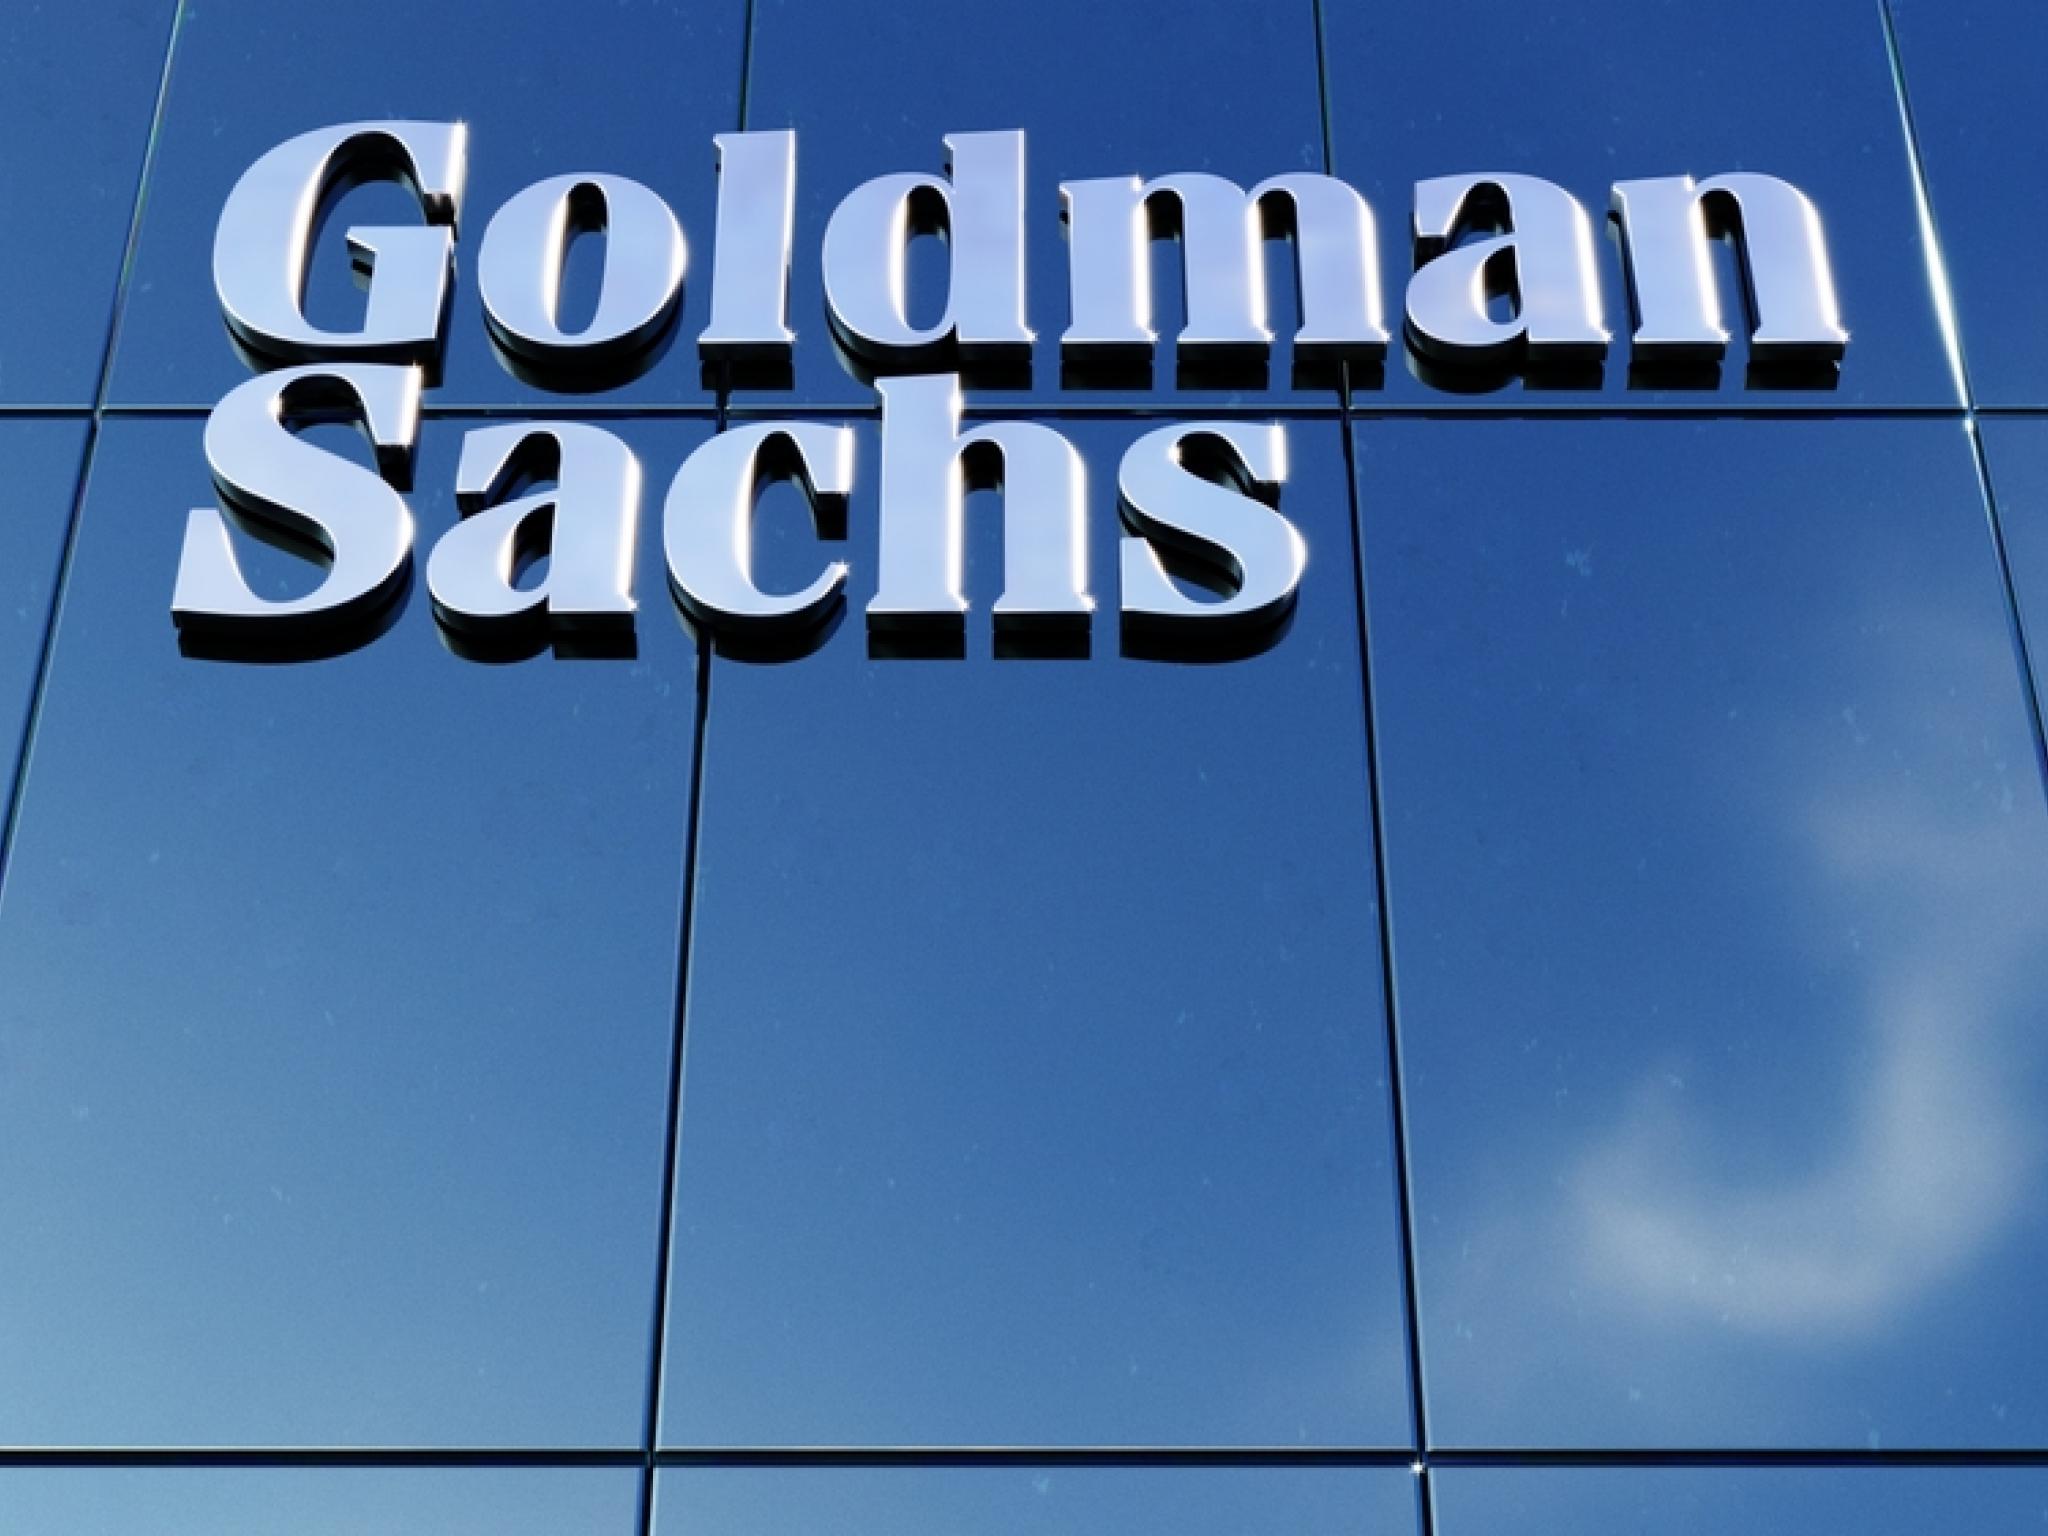  goldman-sachs-likely-to-report-surge-in-q2-earnings-here-are-the-recent-forecast-changes-from-wall-streets-most-accurate-analysts 